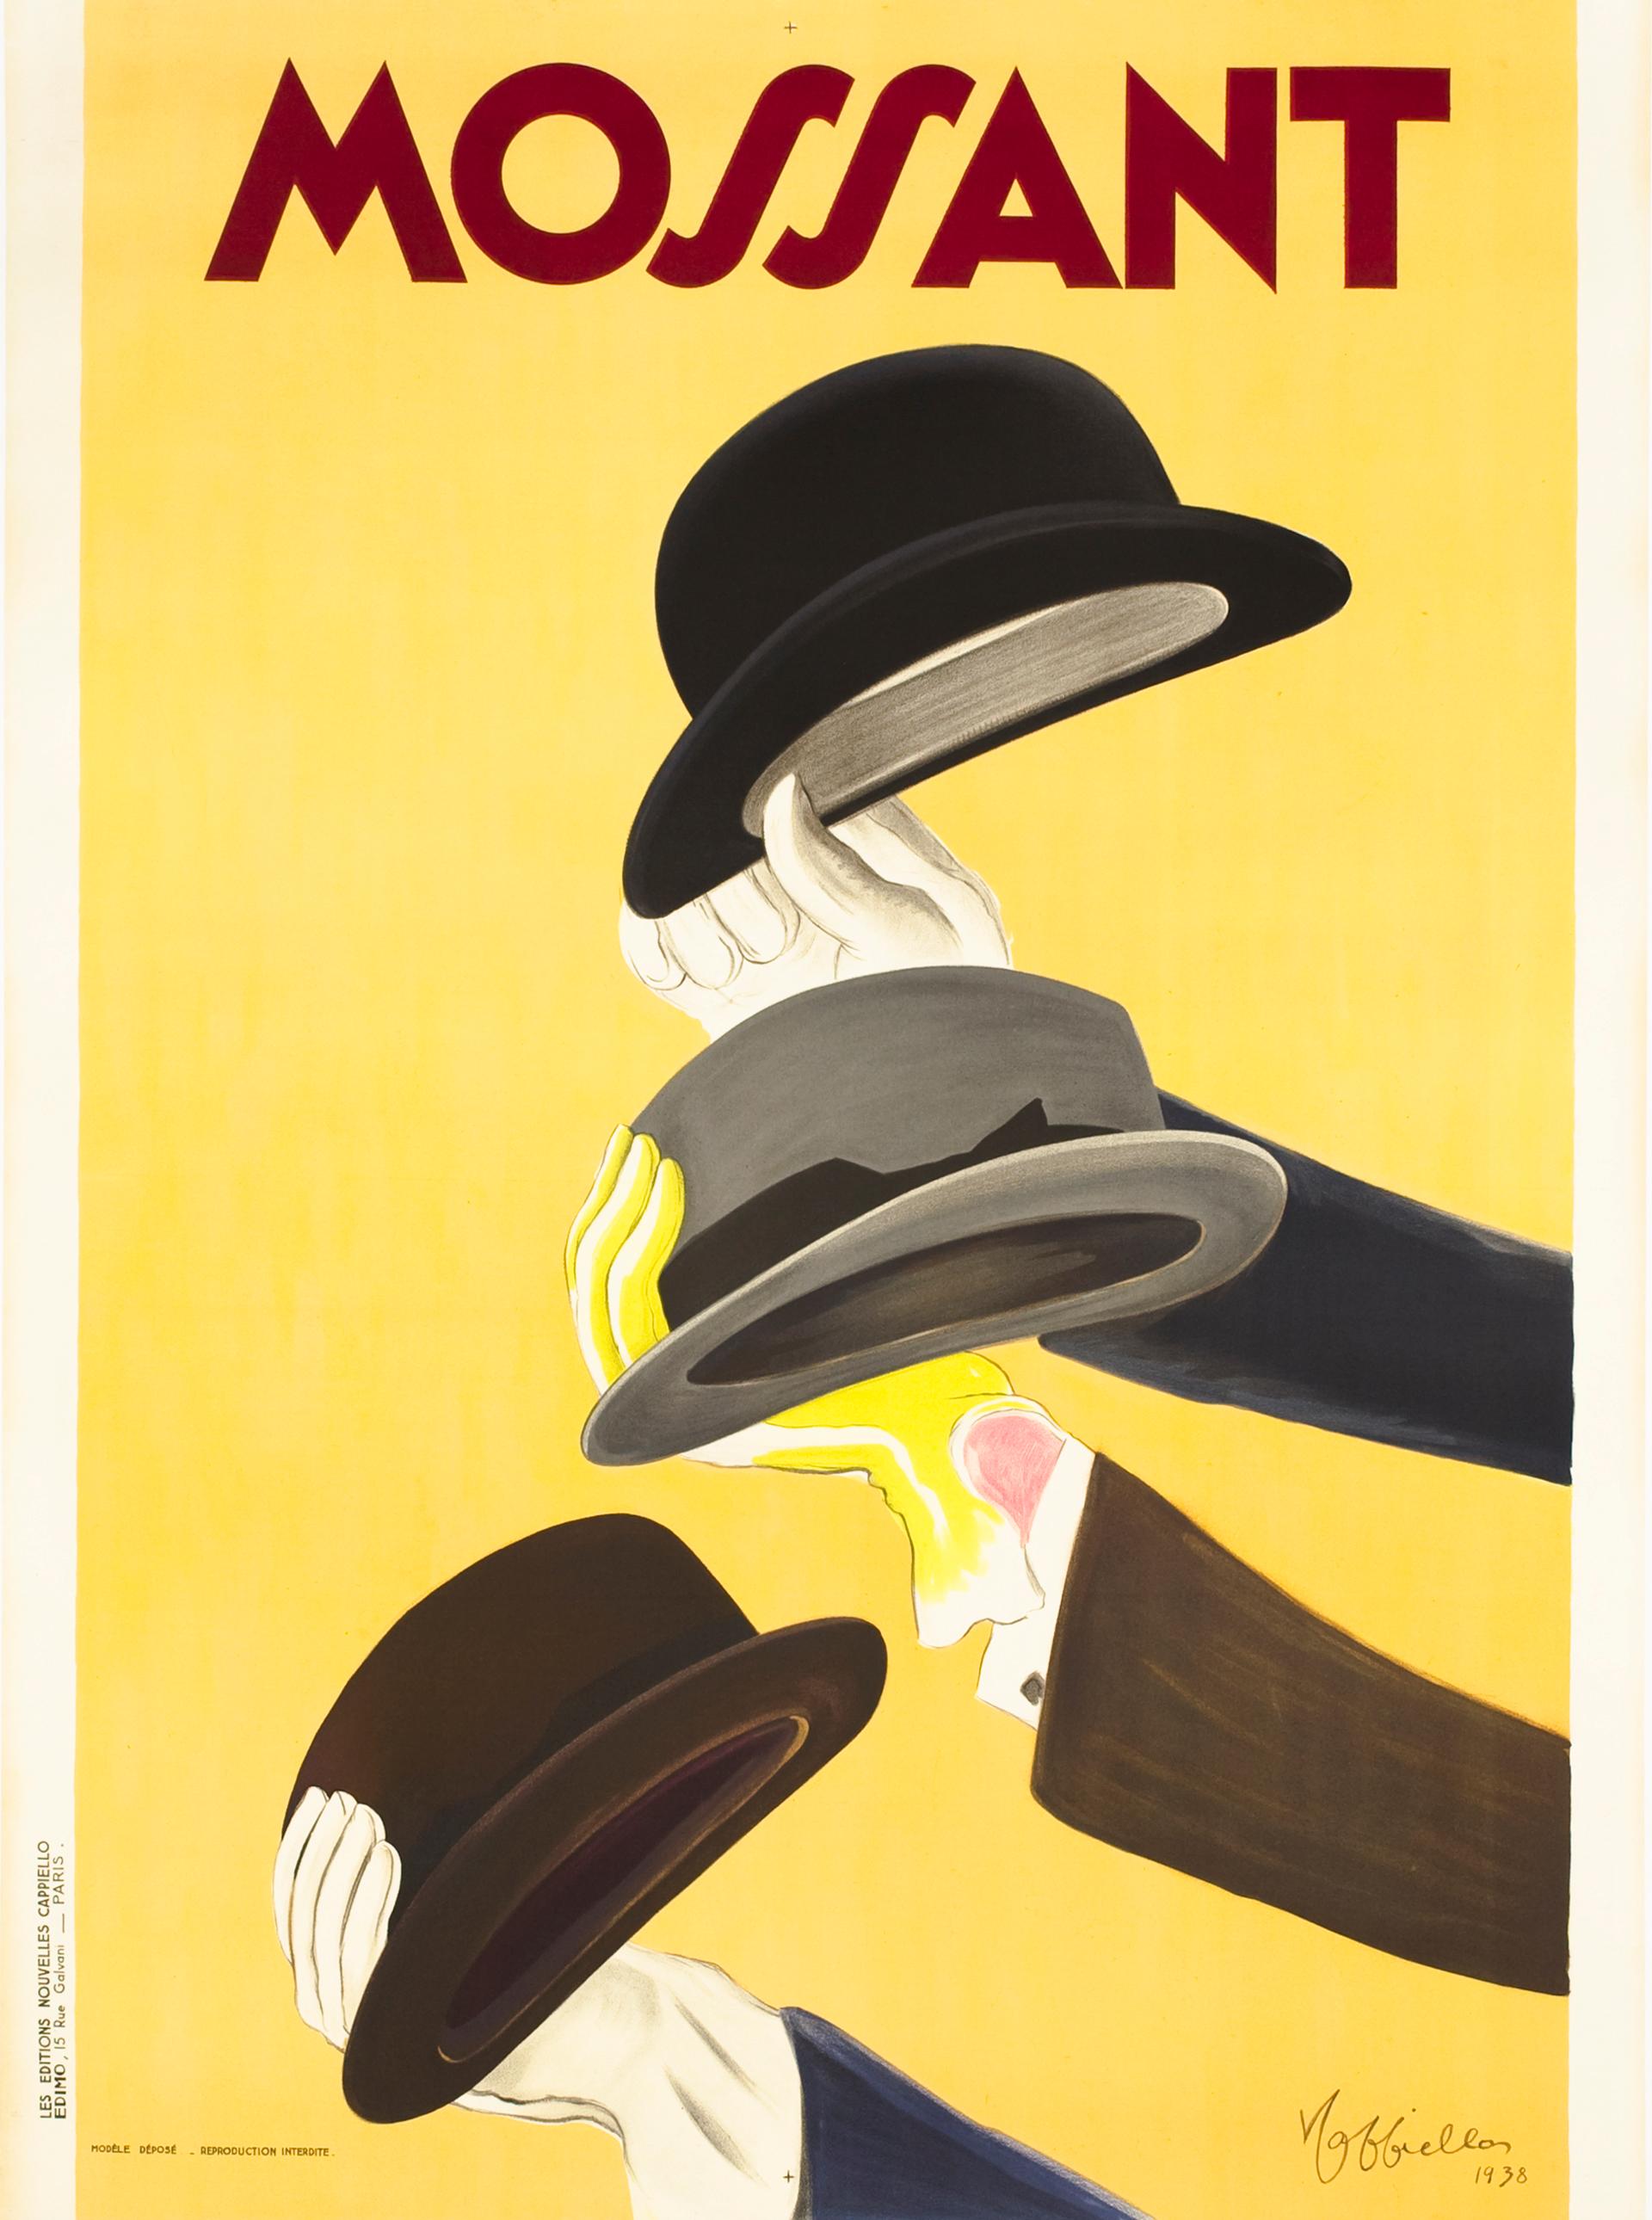 "Mossant" Original French Vintage Hats Poster by Cappiello - Print by Leonetto Cappiello